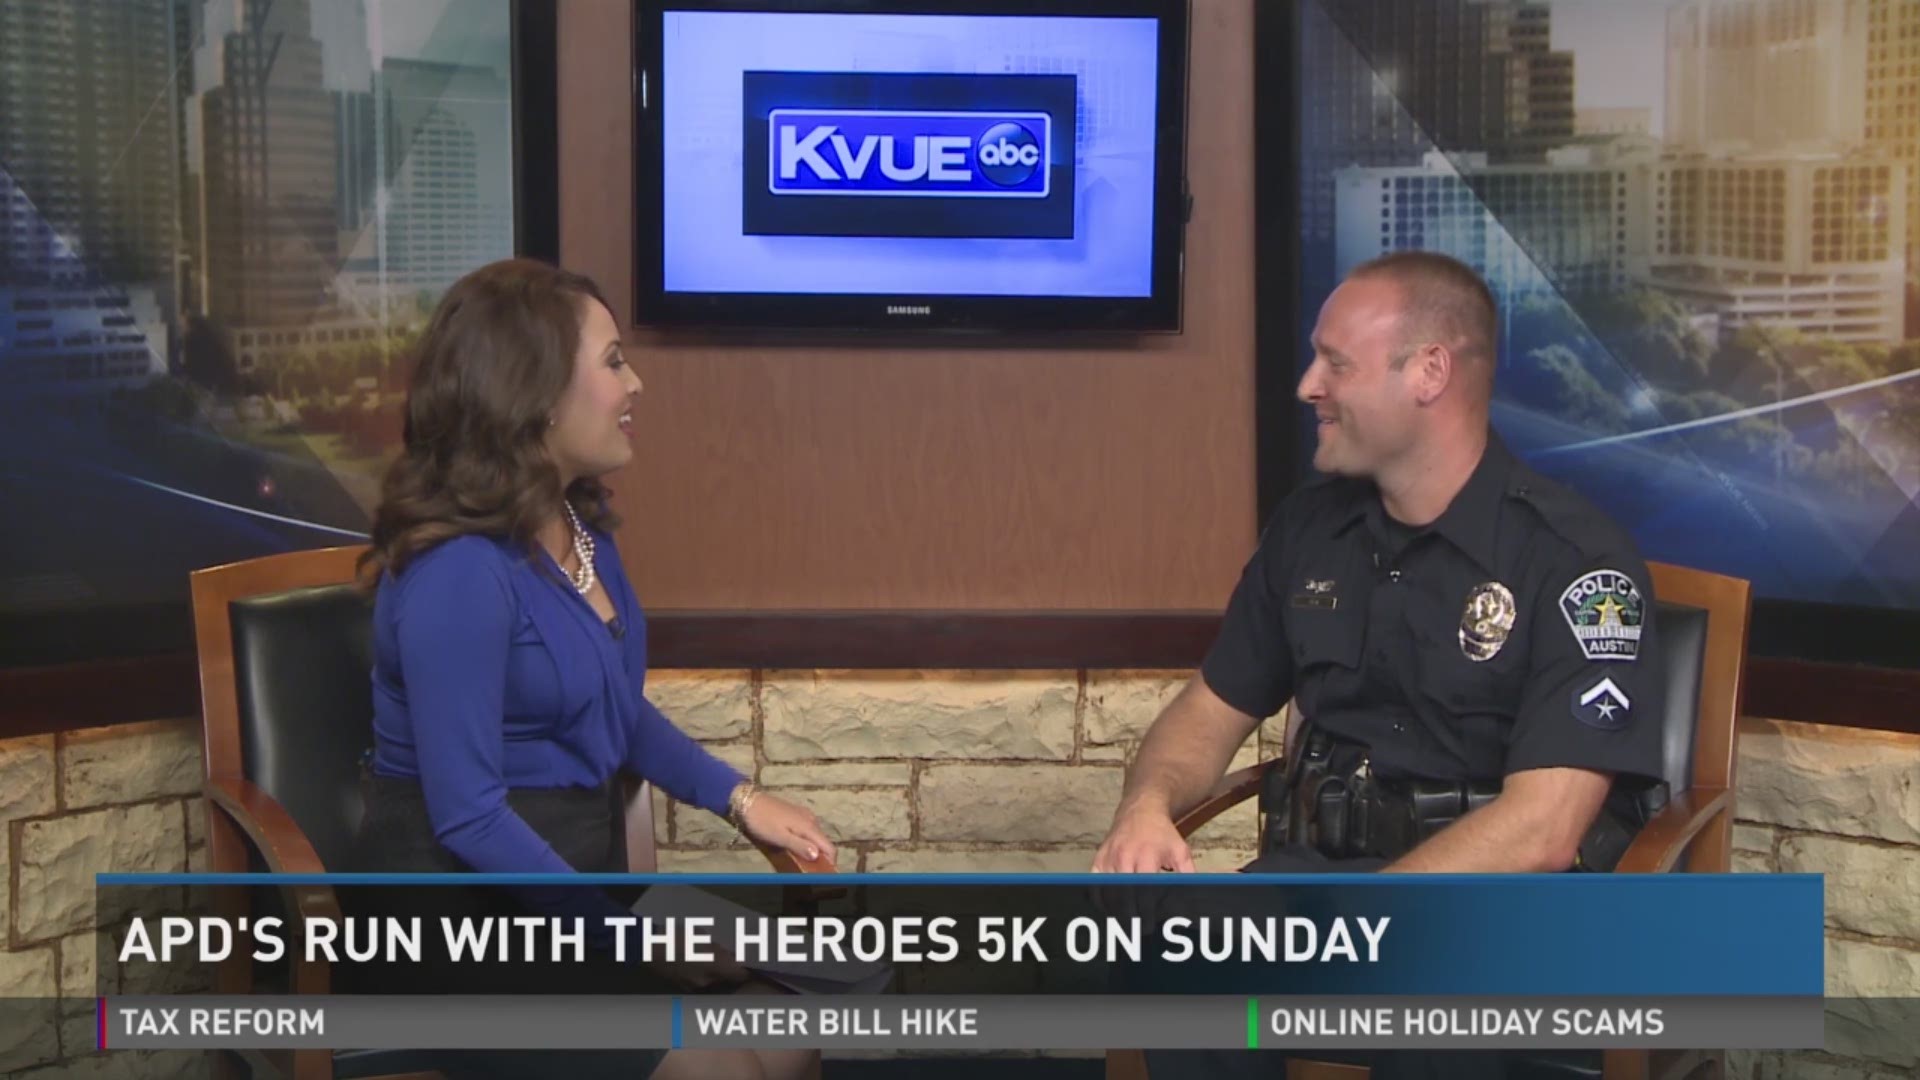 Austin Police Senior Officer Josh Visi shares information on the 10th annual Run with the Heroes 5K, which takes place Nov. 19, 2017 at Camp Mabry.